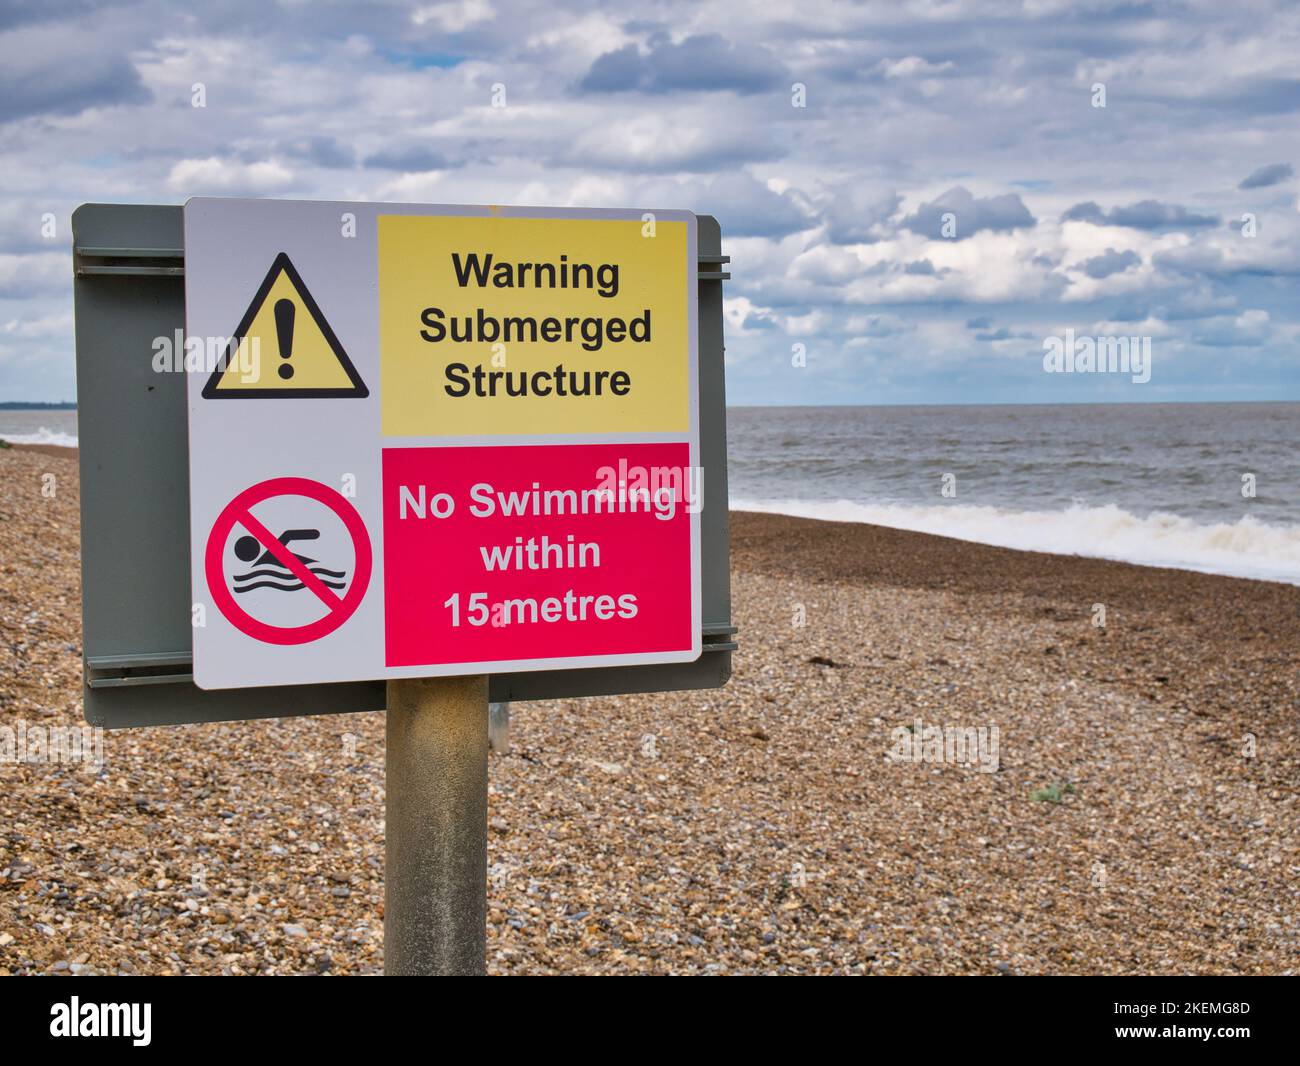 A red and yellow warning sign on a shingle beach at The Sluice on the Suffolk coast warns of a submerged structure and that swimming is not allowed. Stock Photo